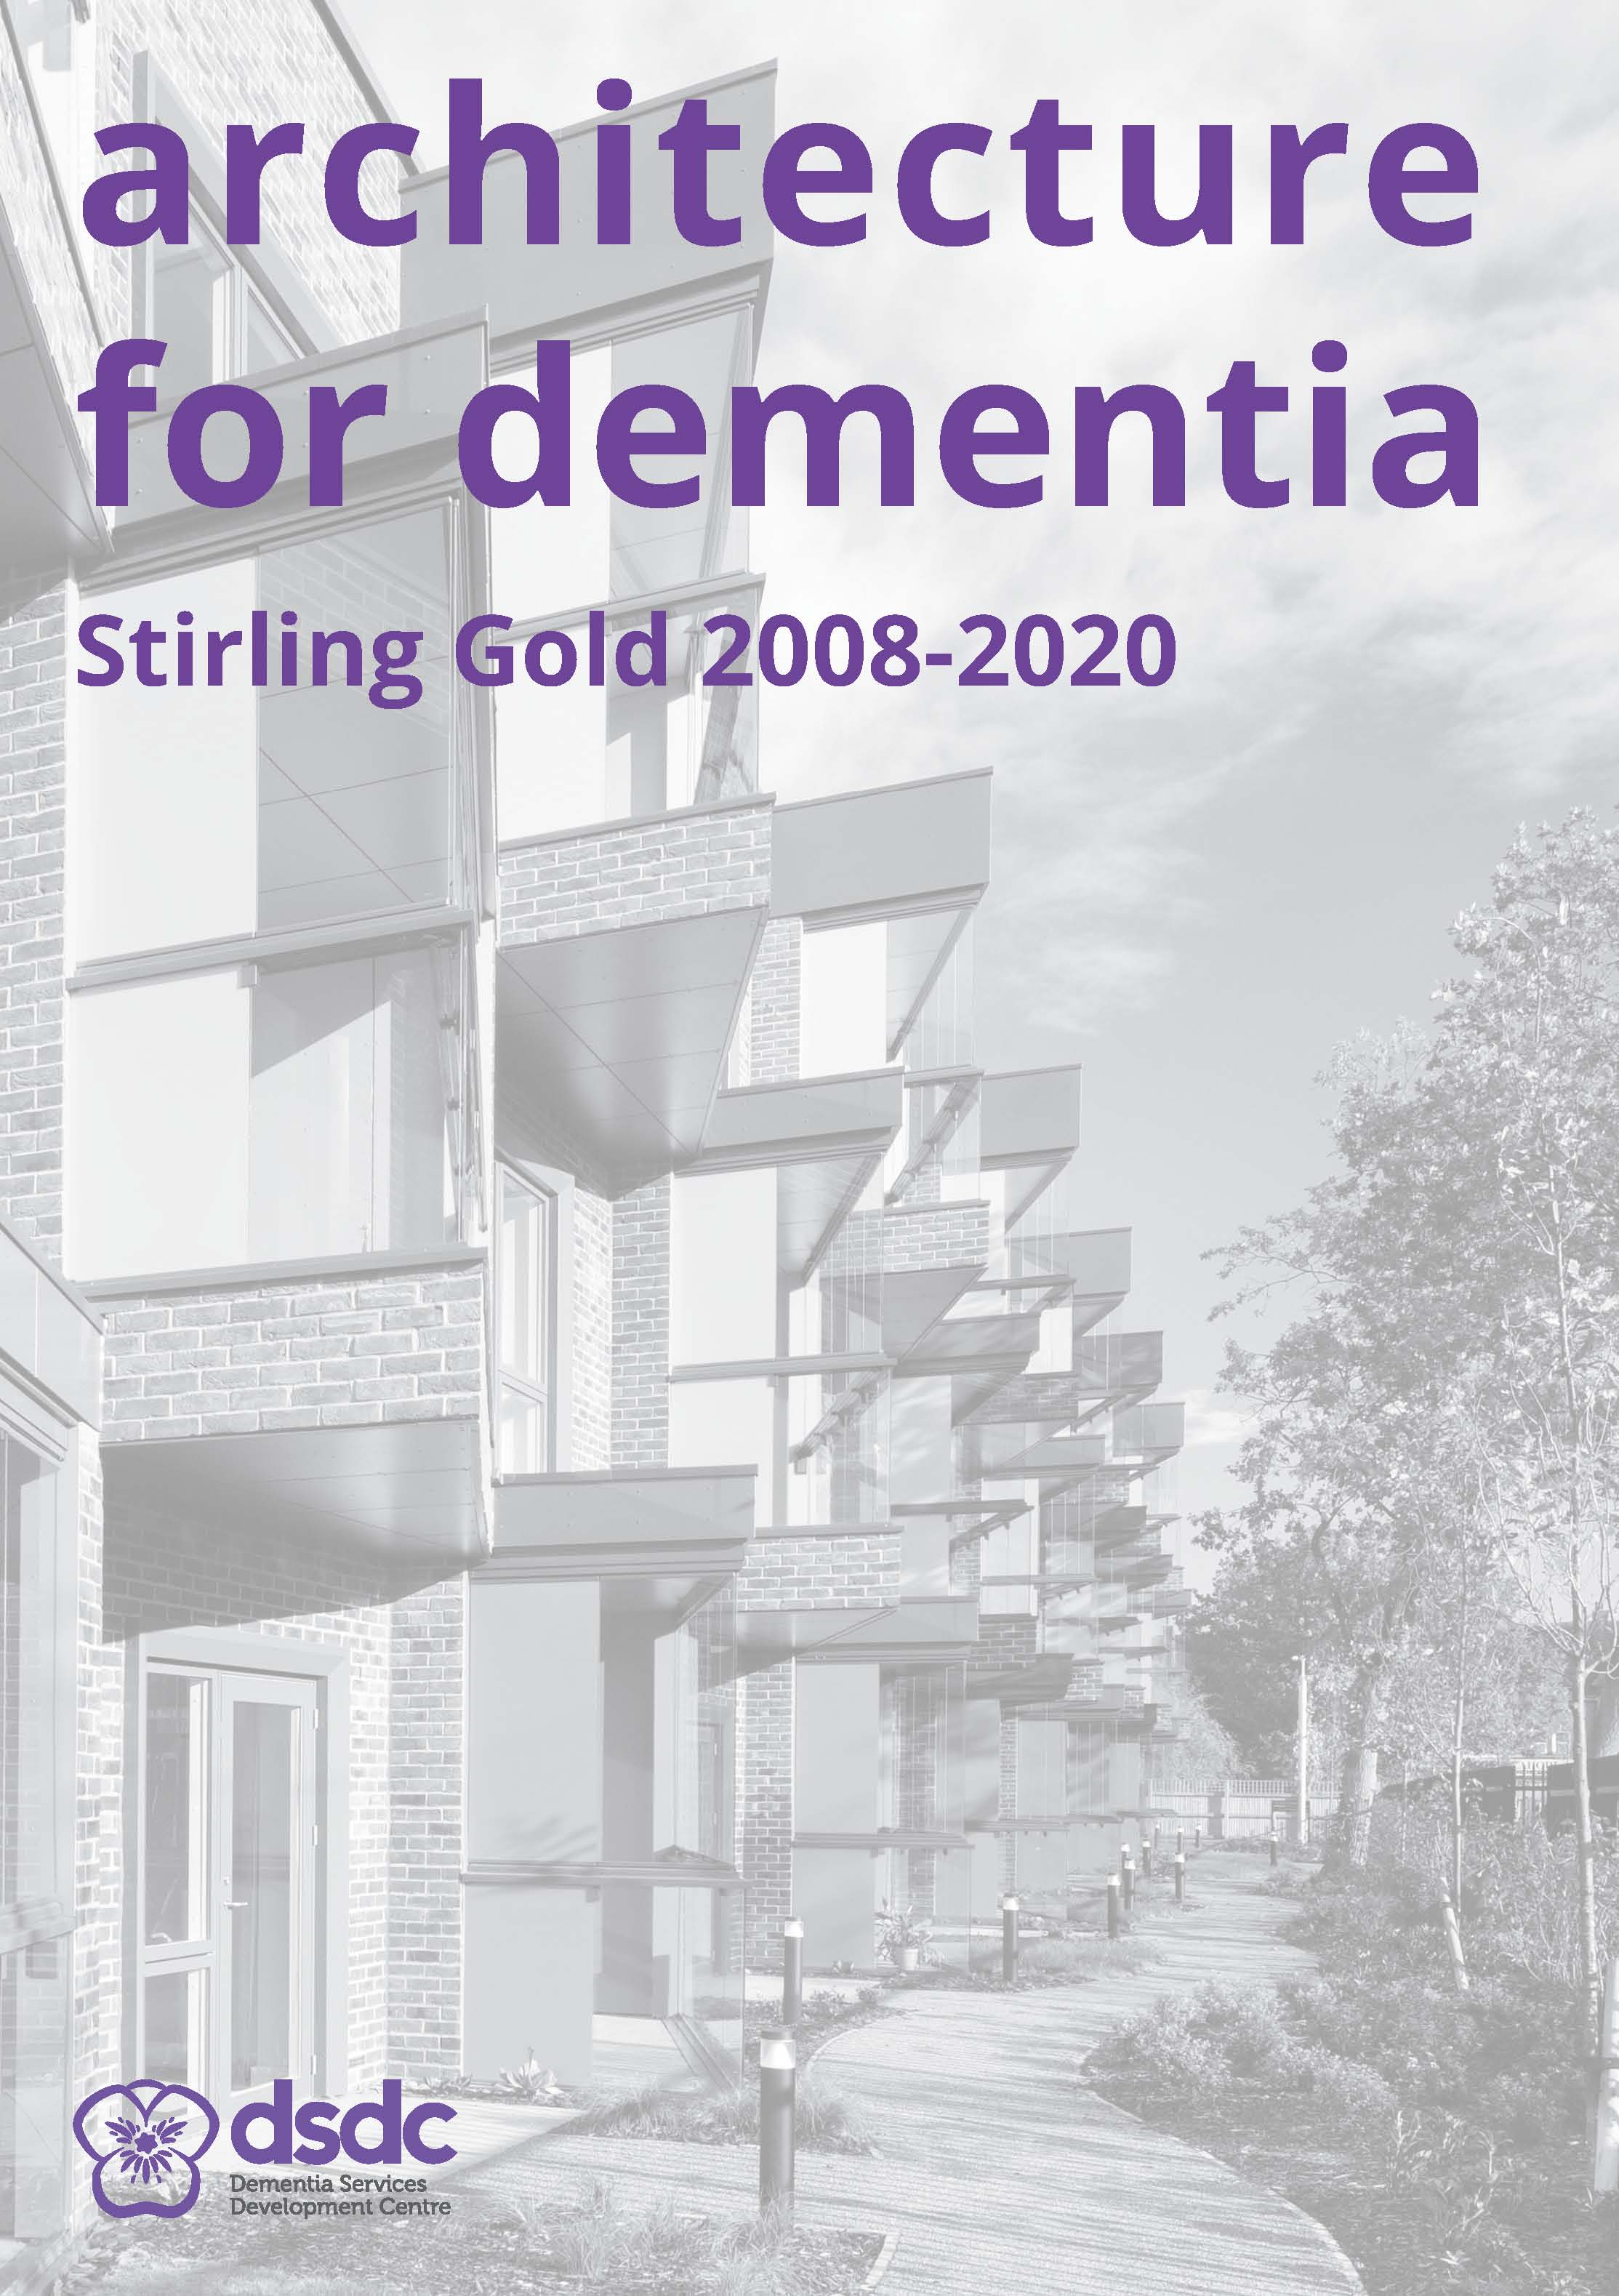 Architecture for Dementia: Stirling Gold 2008-2020